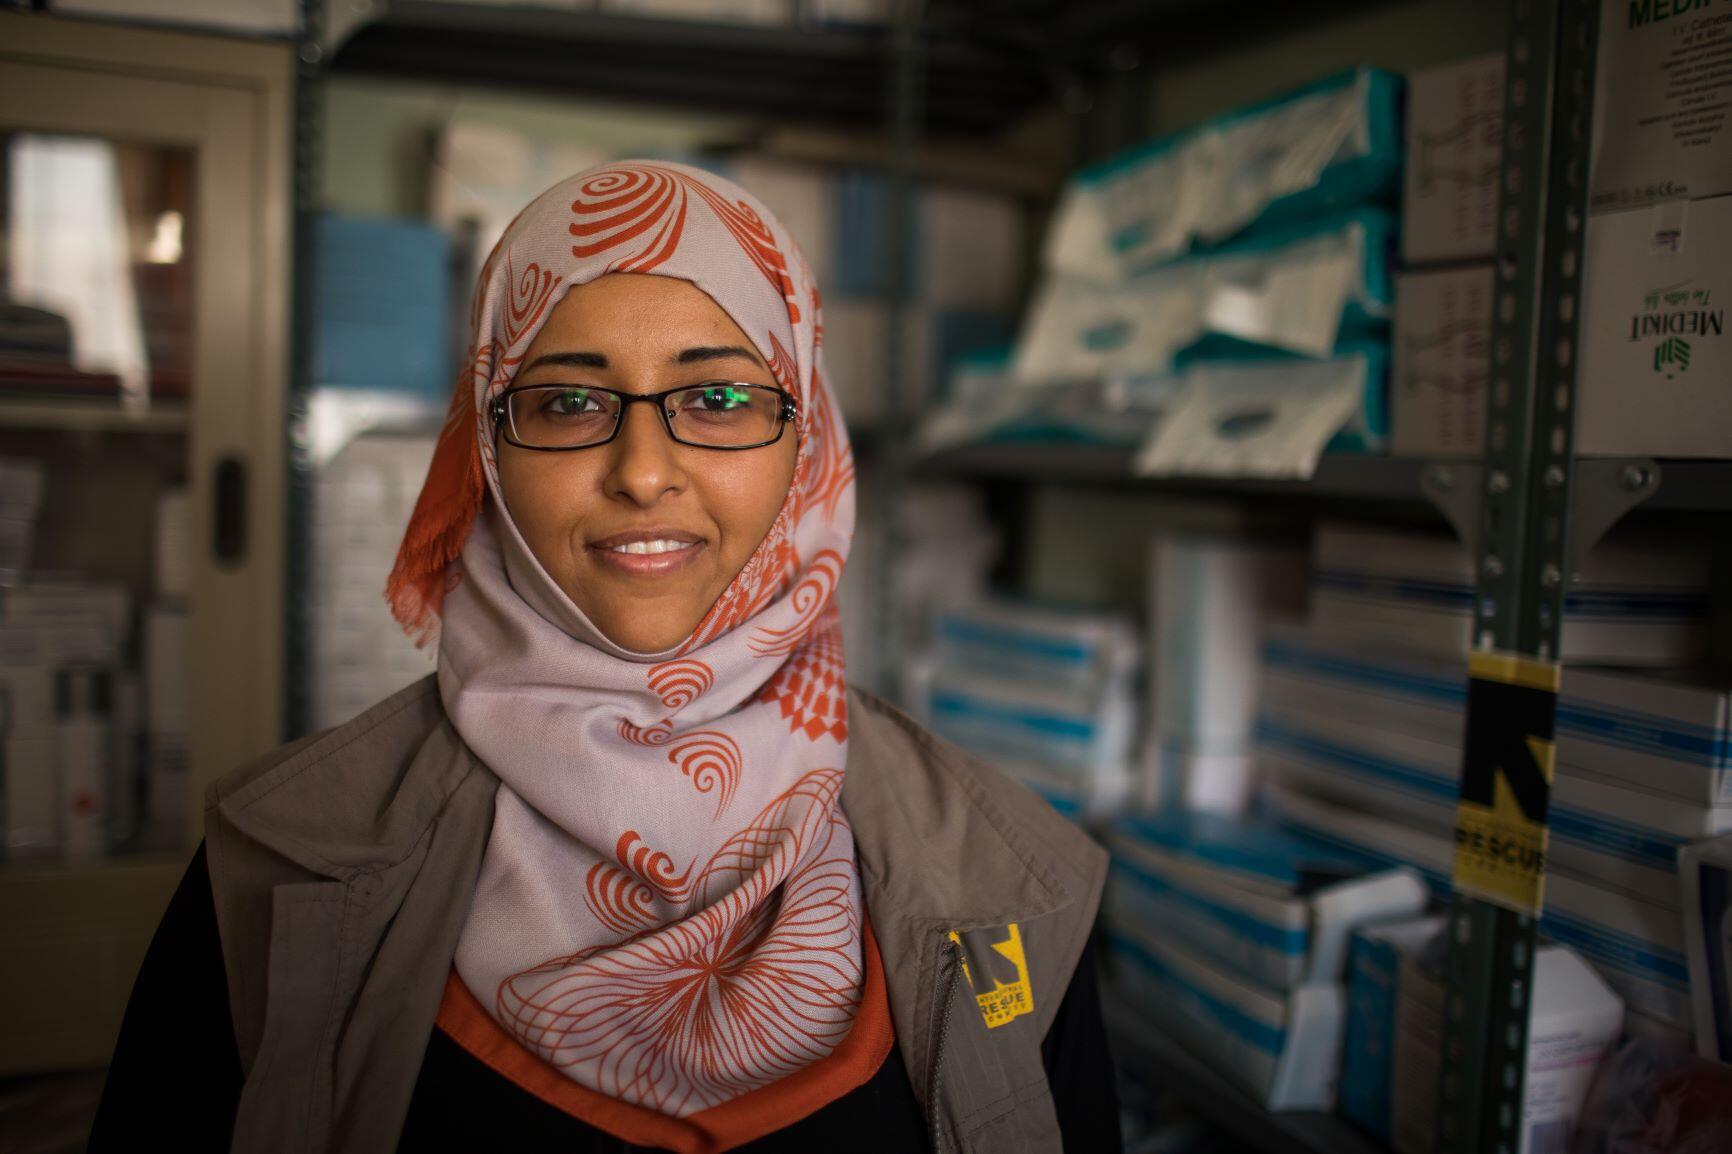 Dr. Rasha Rashed, a doctor and reproductive health manager for the IRC in Yemen, stands in a room with media supplies. She is wearing a red and white scarf and an IRC-branded vest. 